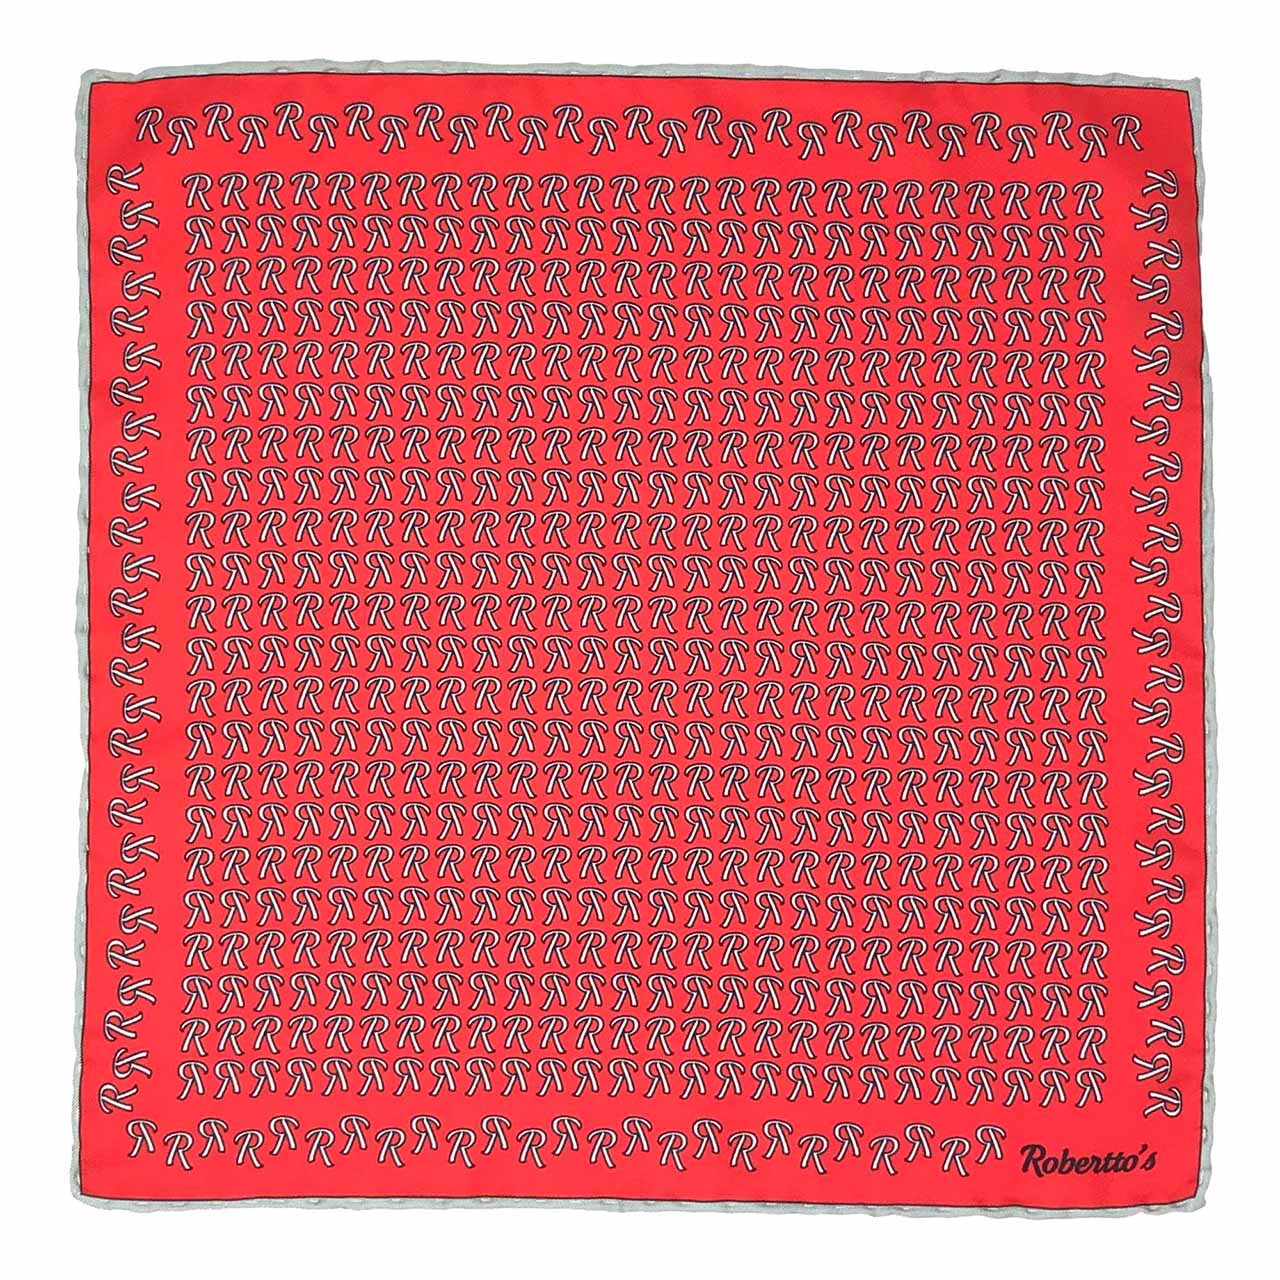 The Monogram Edition Awesome Red Pocket Square